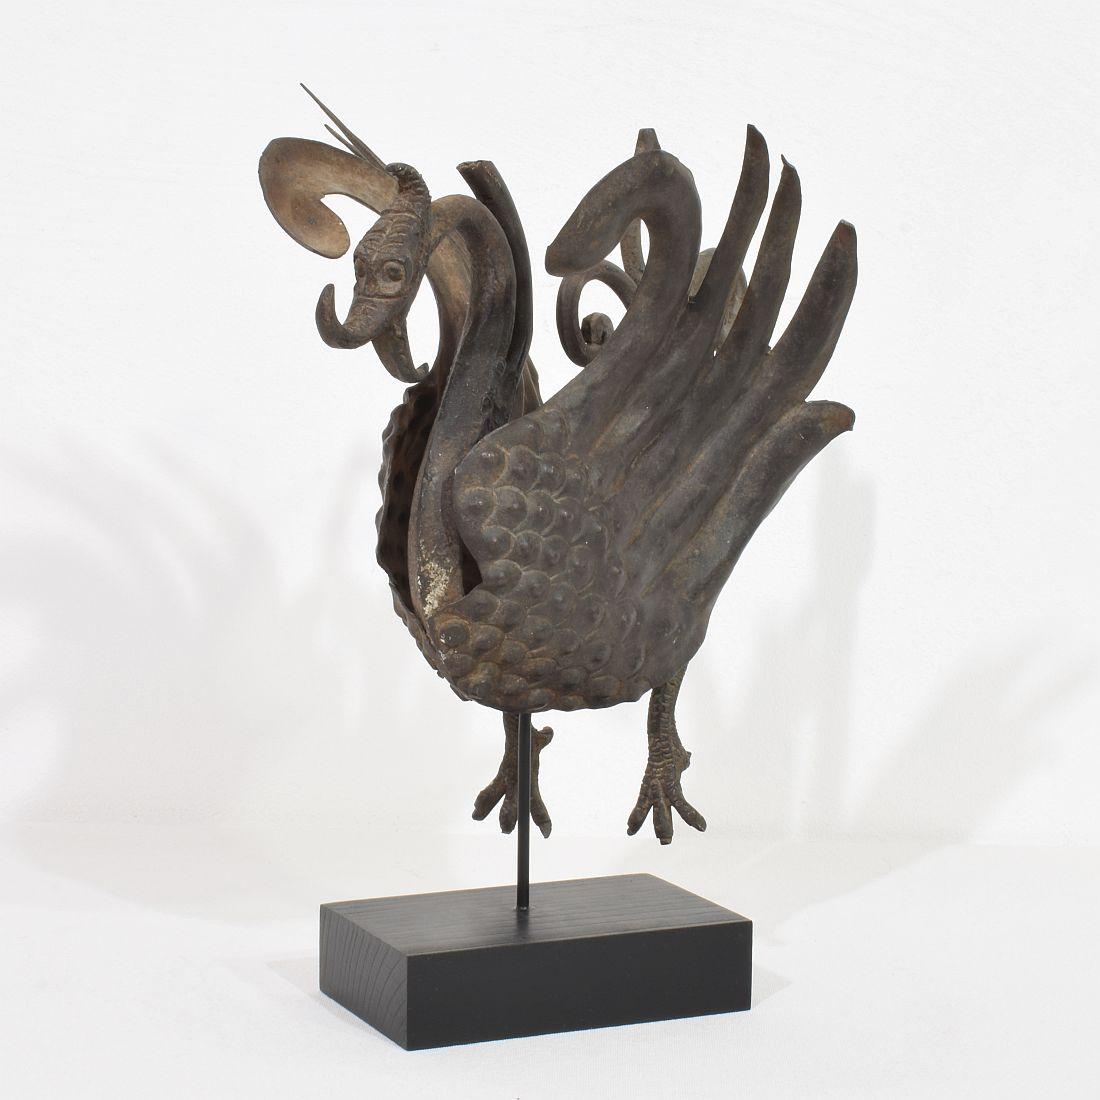 Great hand forged iron bird ornament. Was once part of a larger item.
Weathered. Spain circa 1850
Measurements include the wooden base.